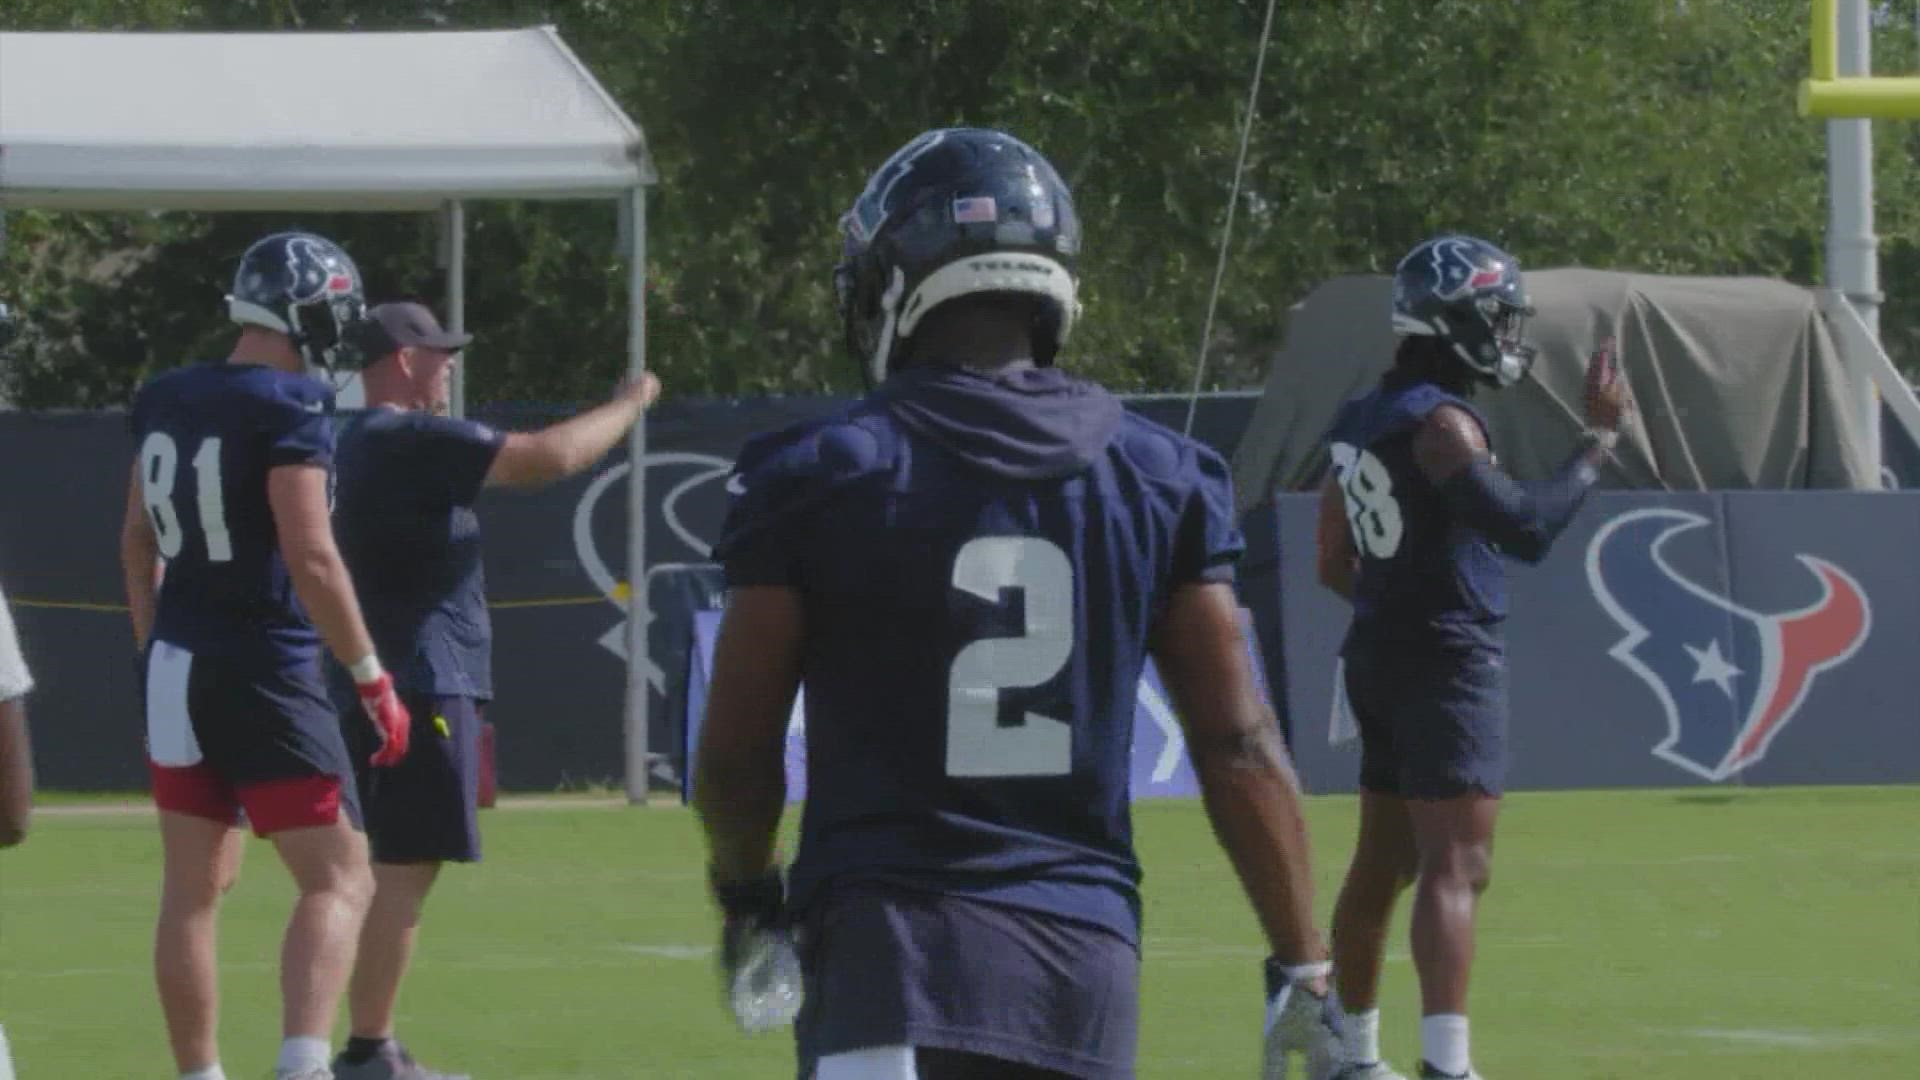 Houston Texans training camp: Fans get up-close look at team